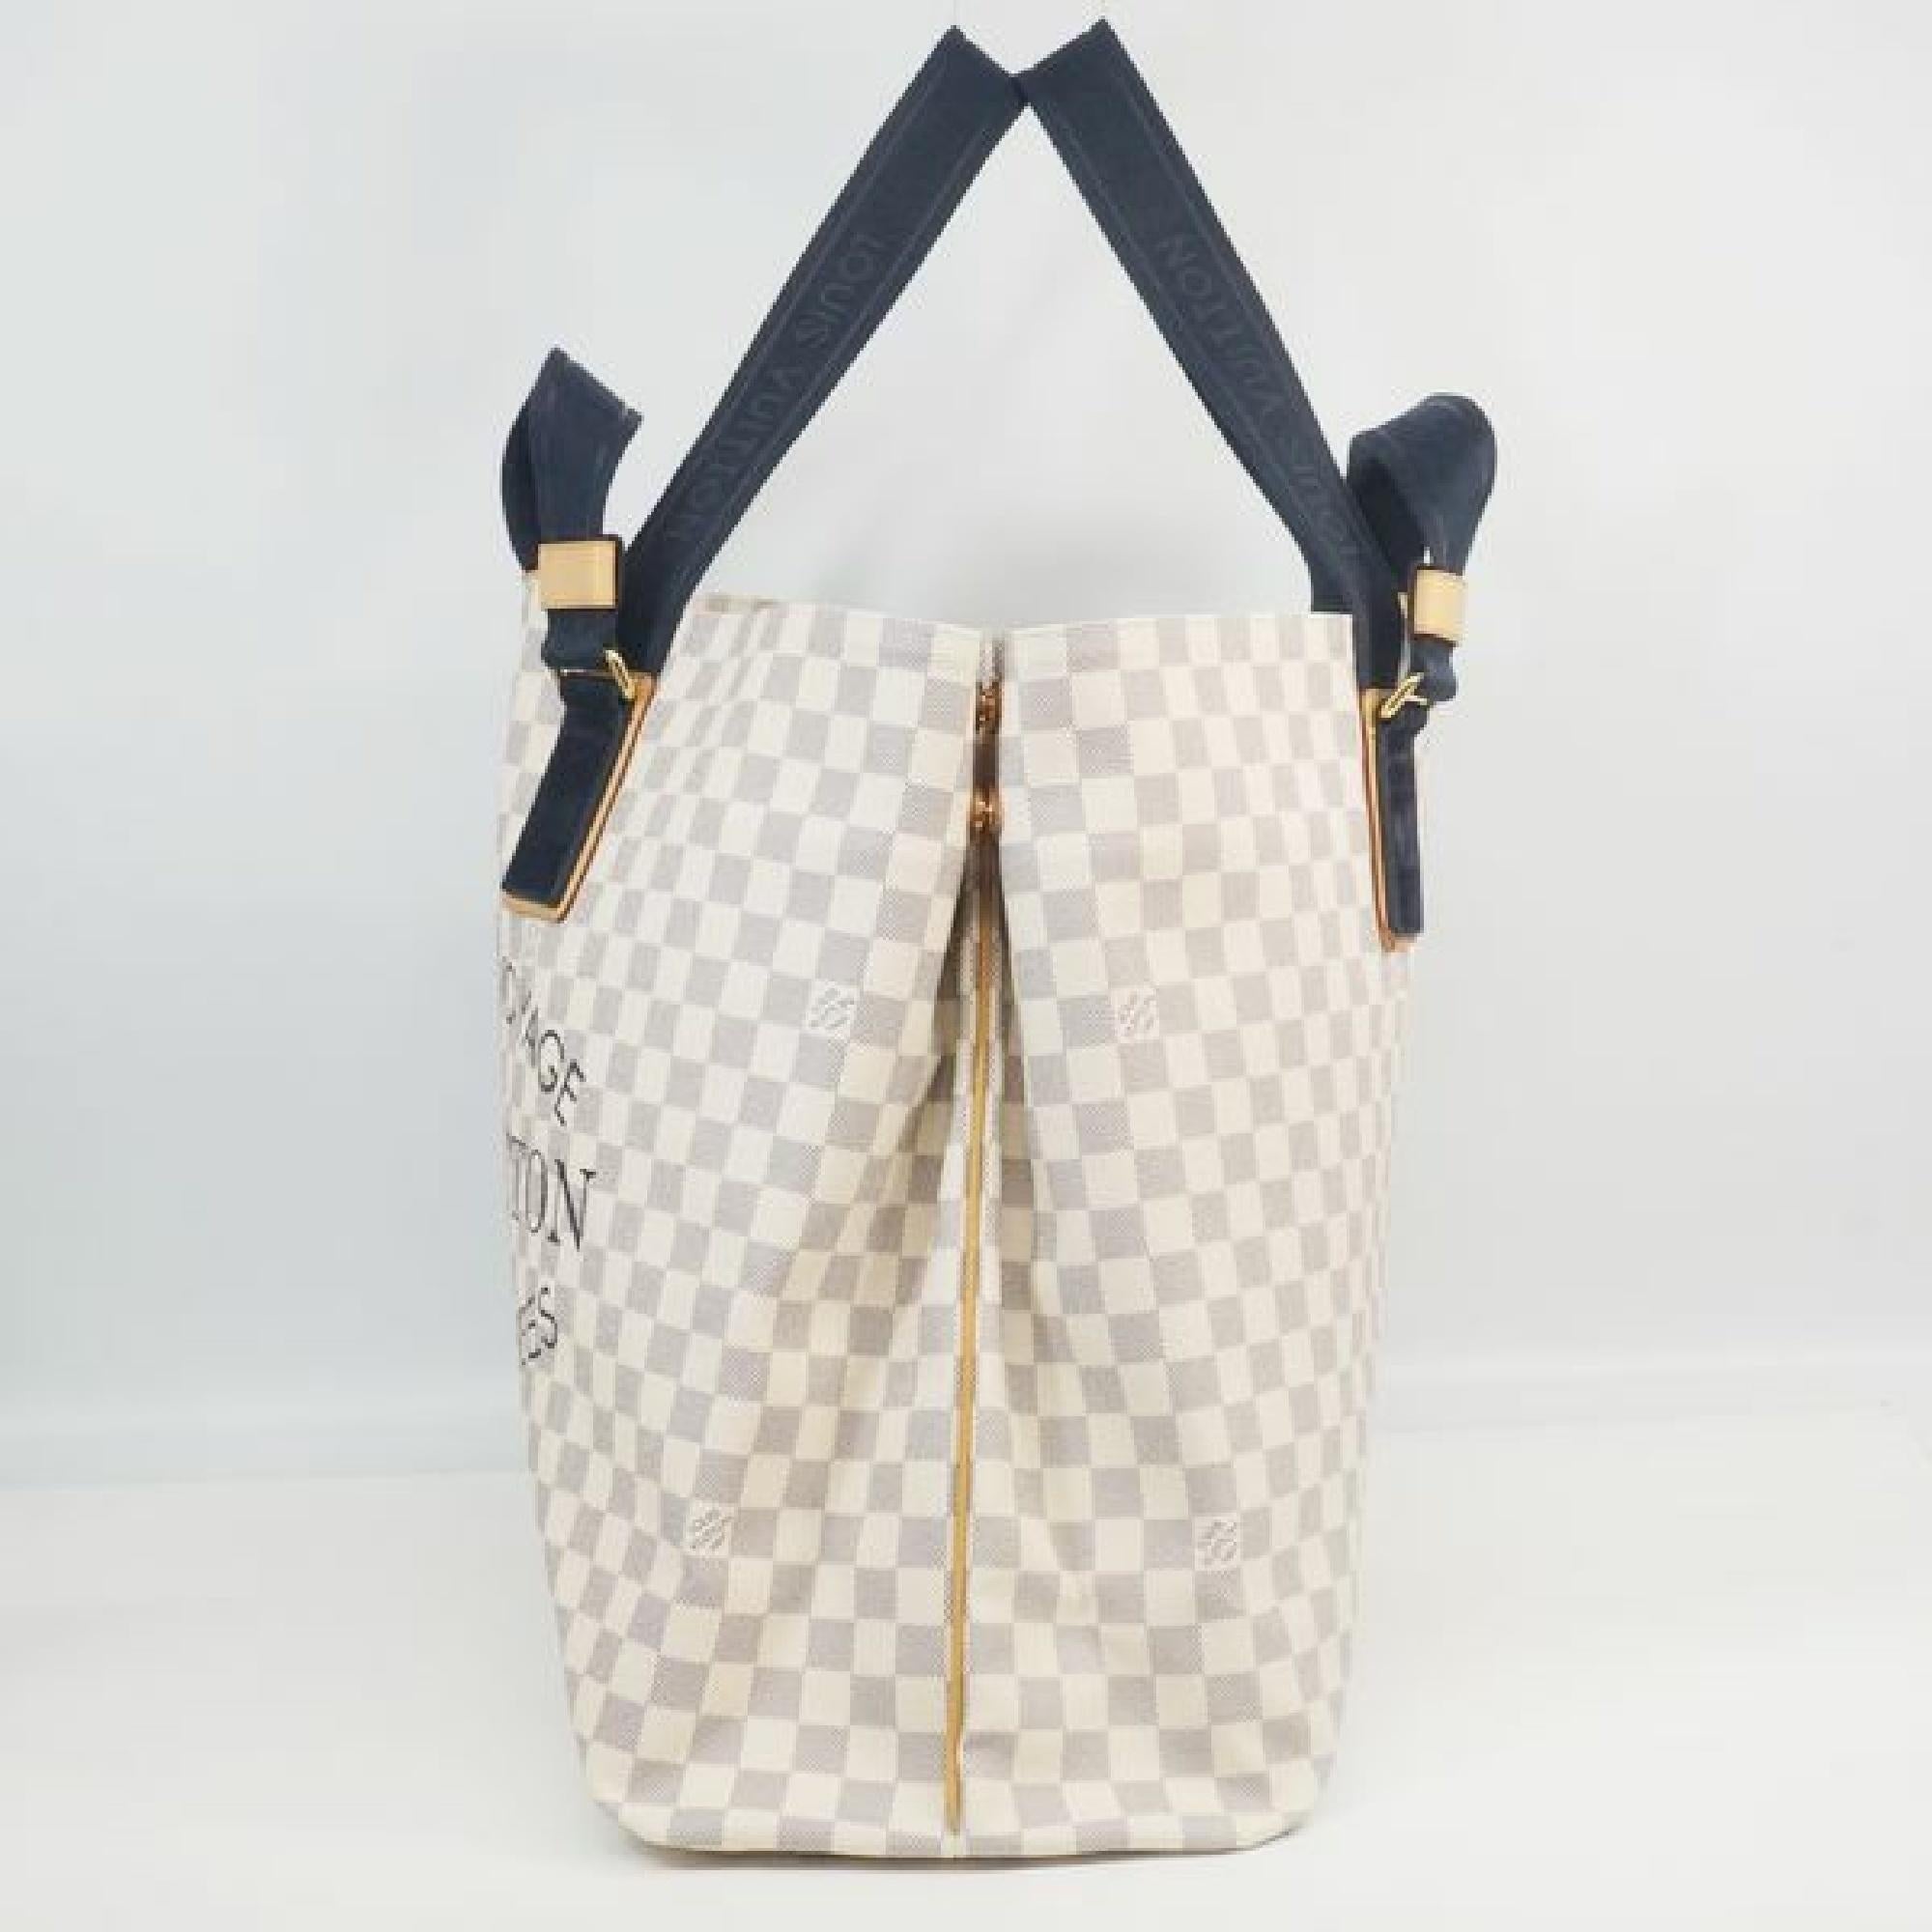 An authentic LOUIS VUITTON Plein Soleil Cabas GM Womens shoulder bag N41180 The outside material is Damier Azur canvas. The pattern is Plein Soleil  CabasGM. This item is Contemporary. The year of manufacture would be 2012.
Rank
SA slightly